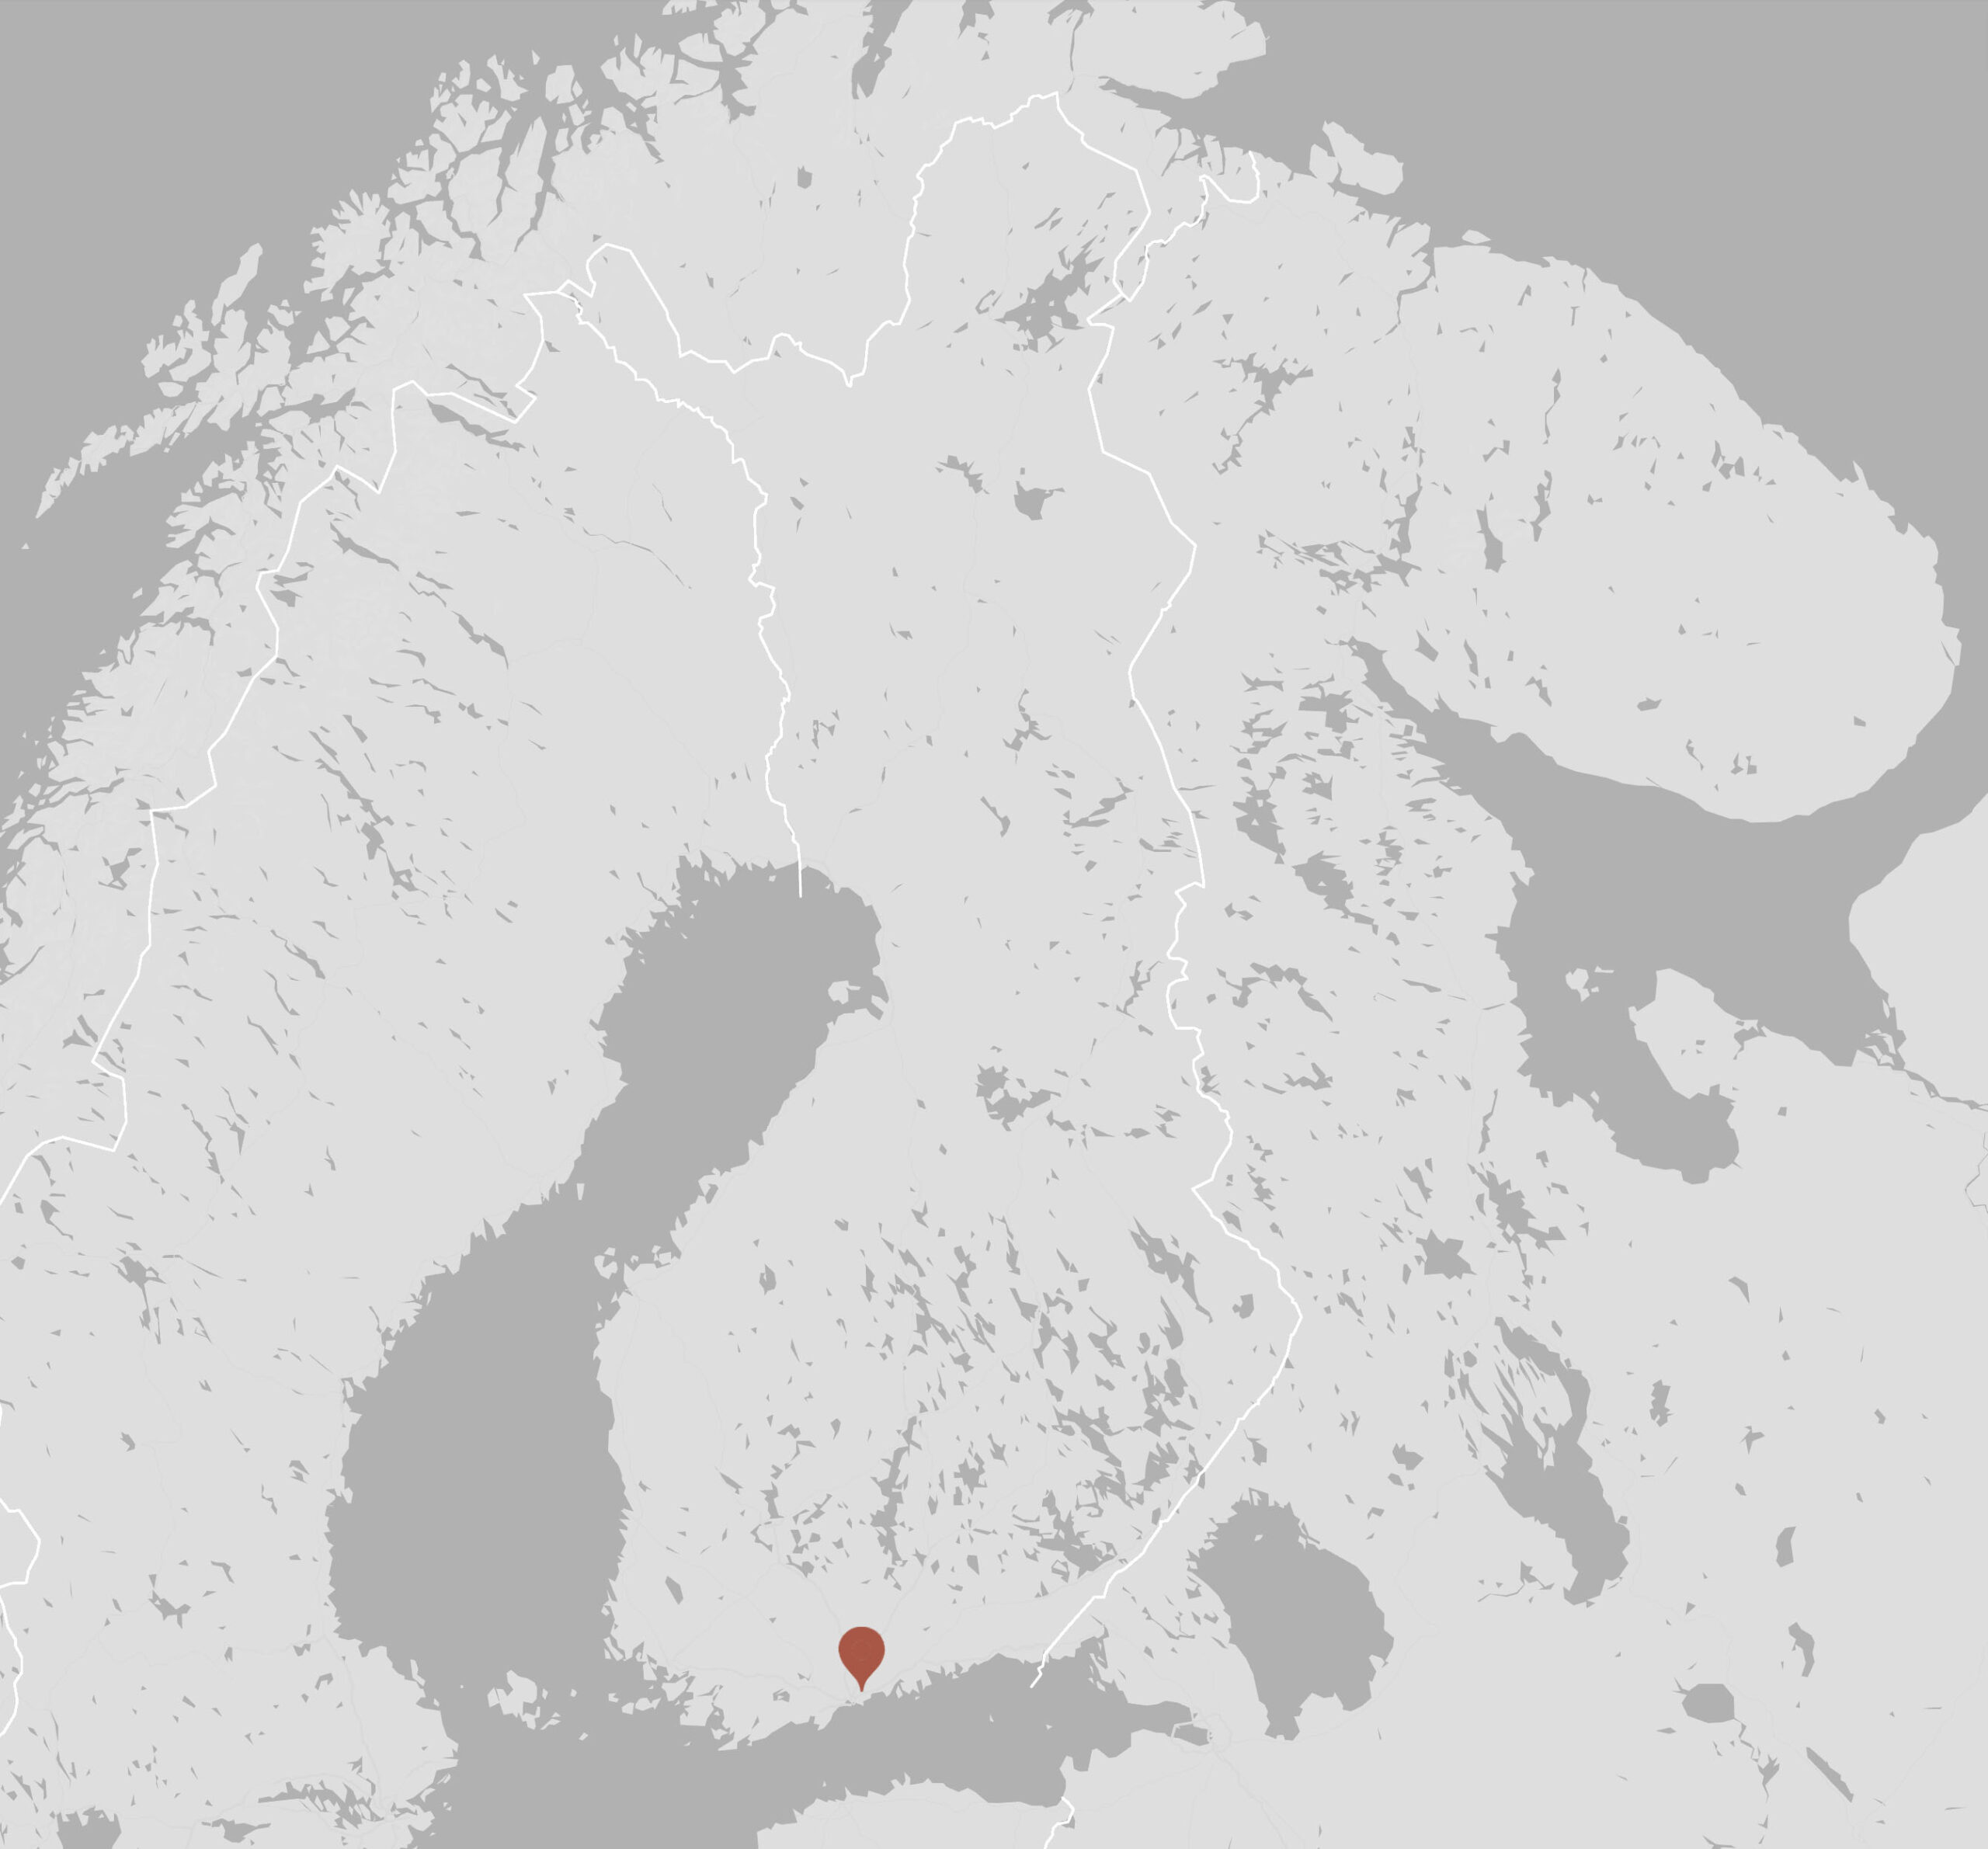 Location of the Tikkurila Church and Housing on the map of Finland